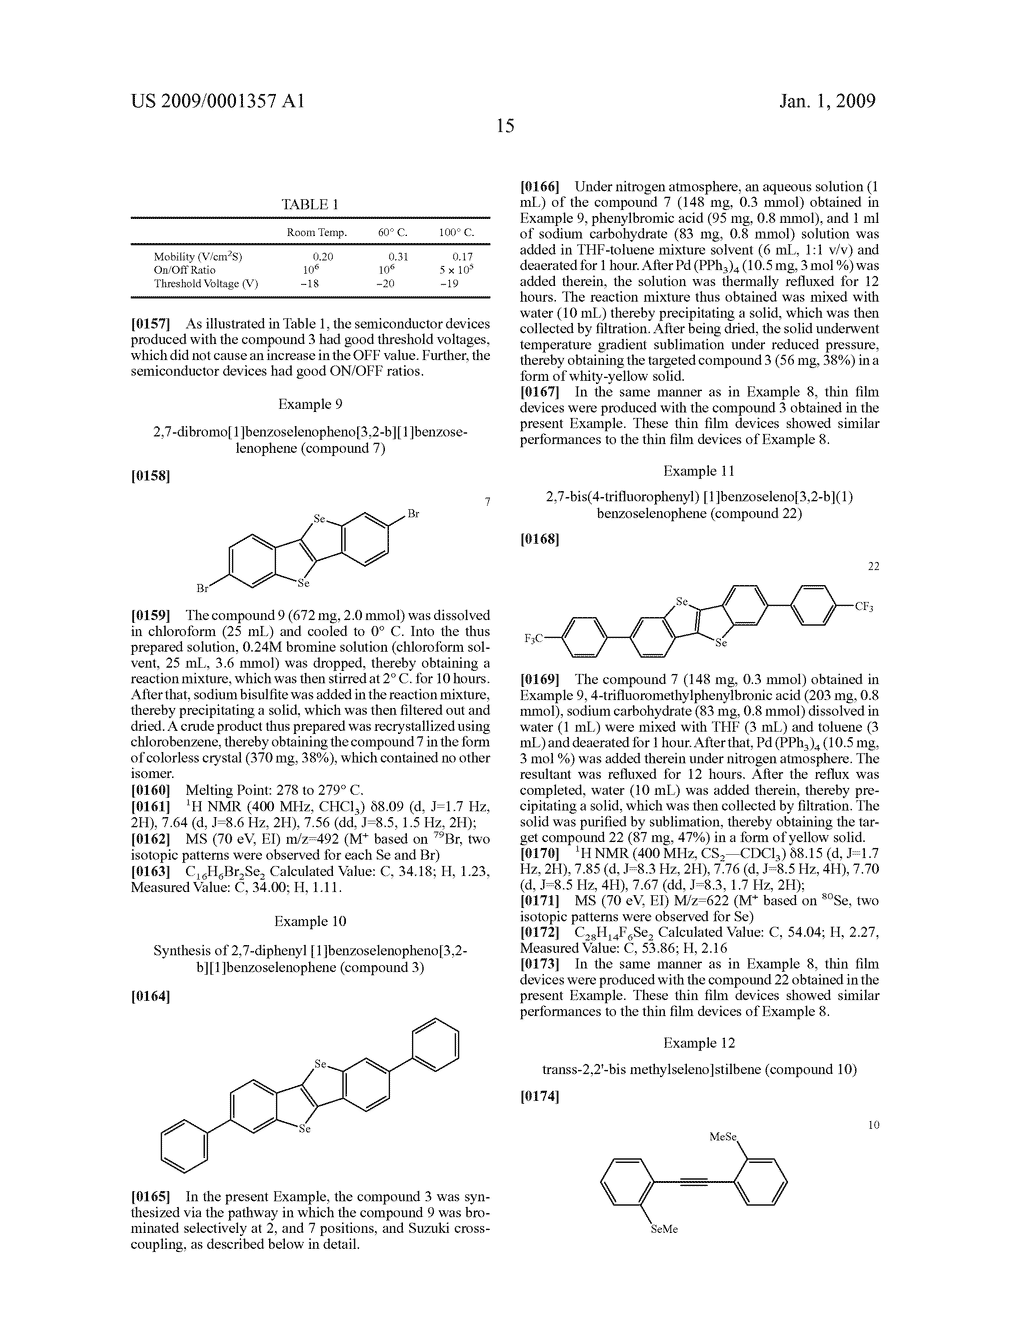 Novel Condensed Polycyclic Aromatic Compound and Use Thereof - diagram, schematic, and image 20